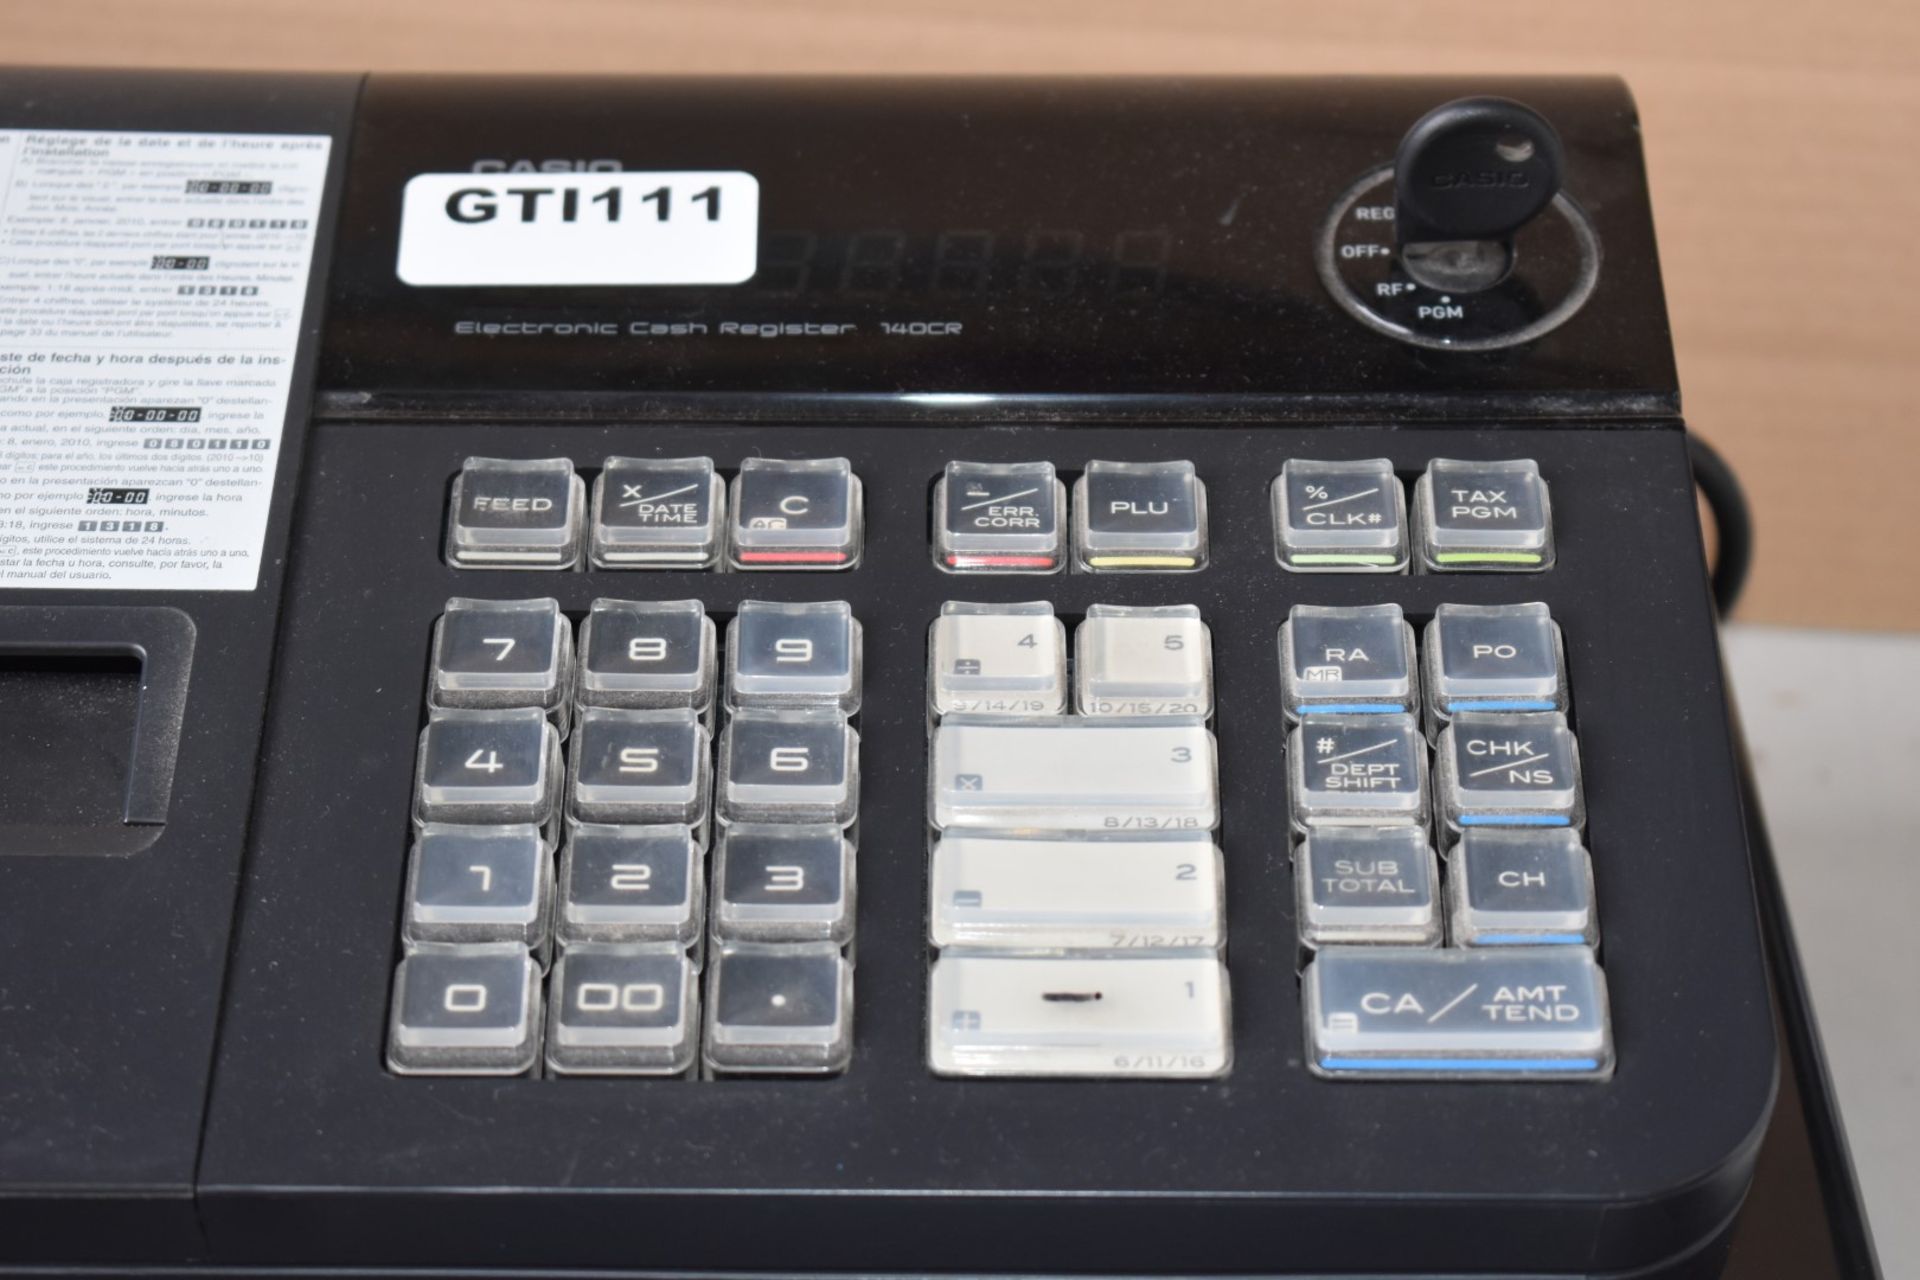 1 x Casio 140CR Electronic Cash Register - Ref: GTI111 - Key Not Included - CL645 - Location: - Image 2 of 5